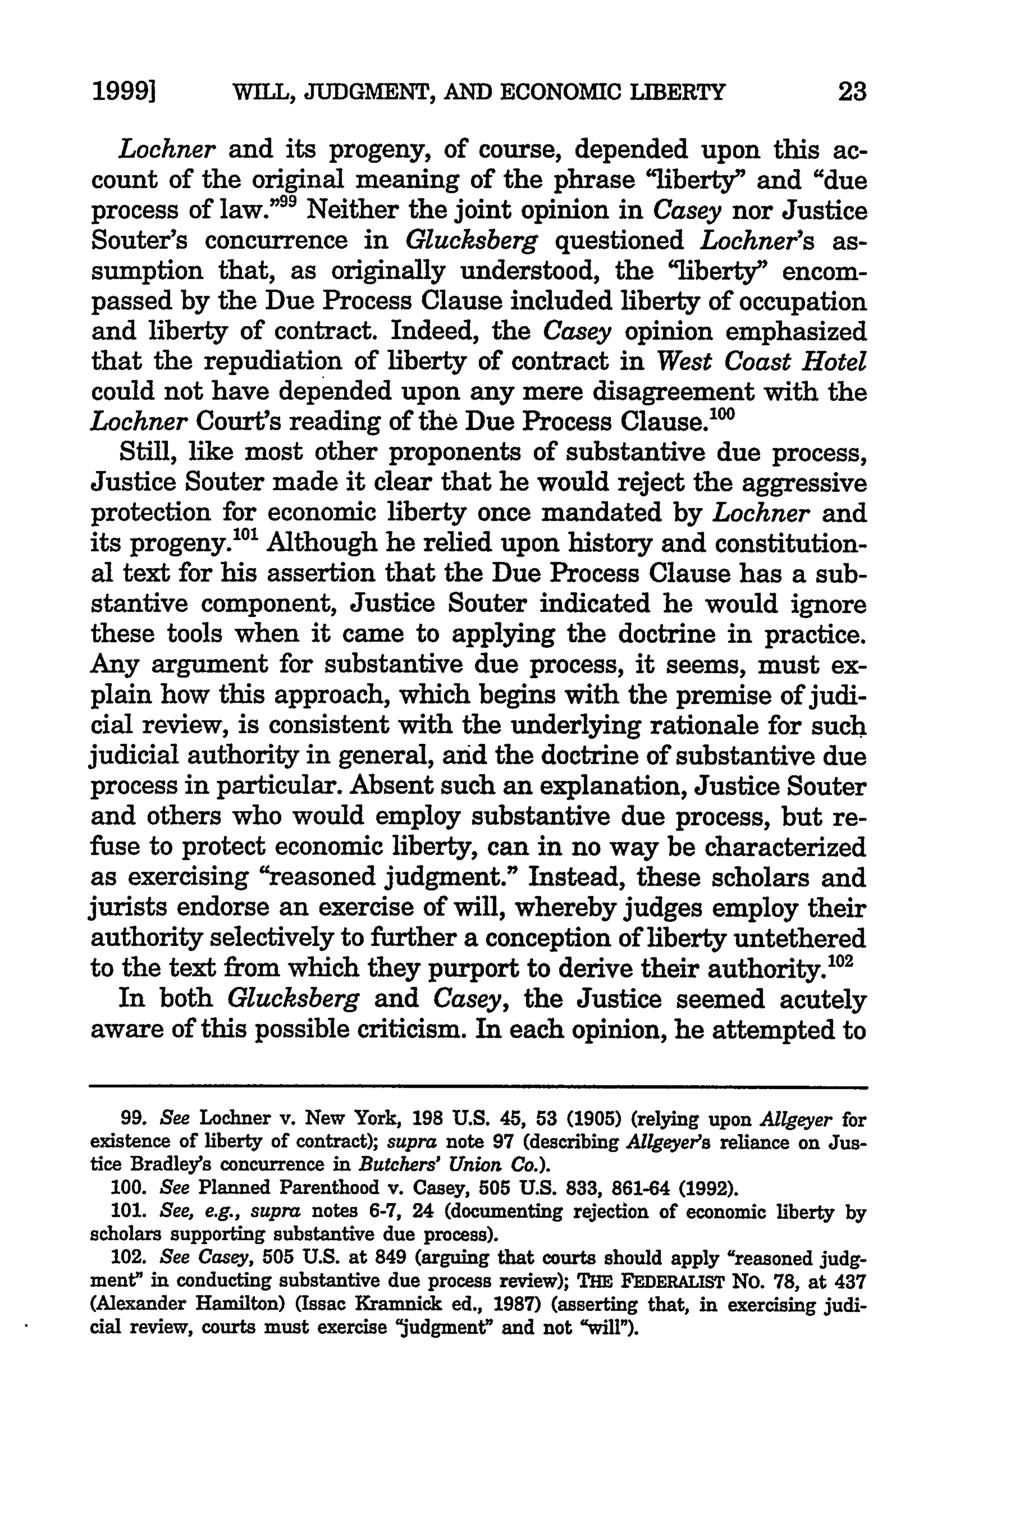 1999] WILL, JUDGMENT, AND ECONOMIC LIBERTY Lochner and its progeny, of course, depended upon this account of the original meaning of the phrase "liberty" and "due process of law.